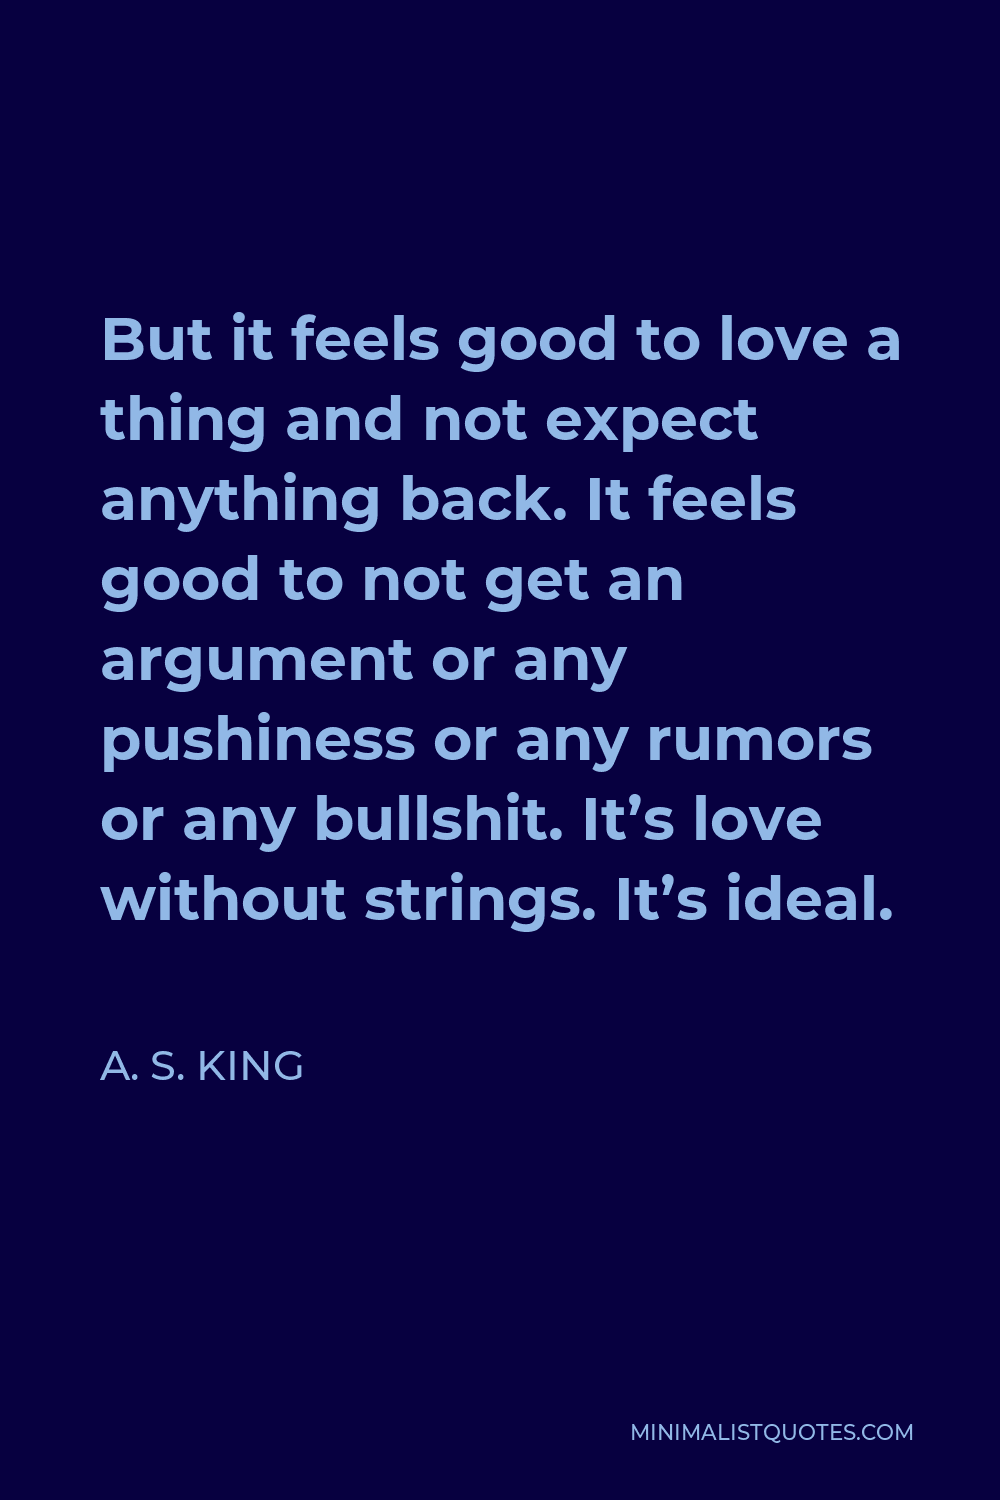 A. S. King Quote - But it feels good to love a thing and not expect anything back. It feels good to not get an argument or any pushiness or any rumors or any bullshit. It’s love without strings. It’s ideal.